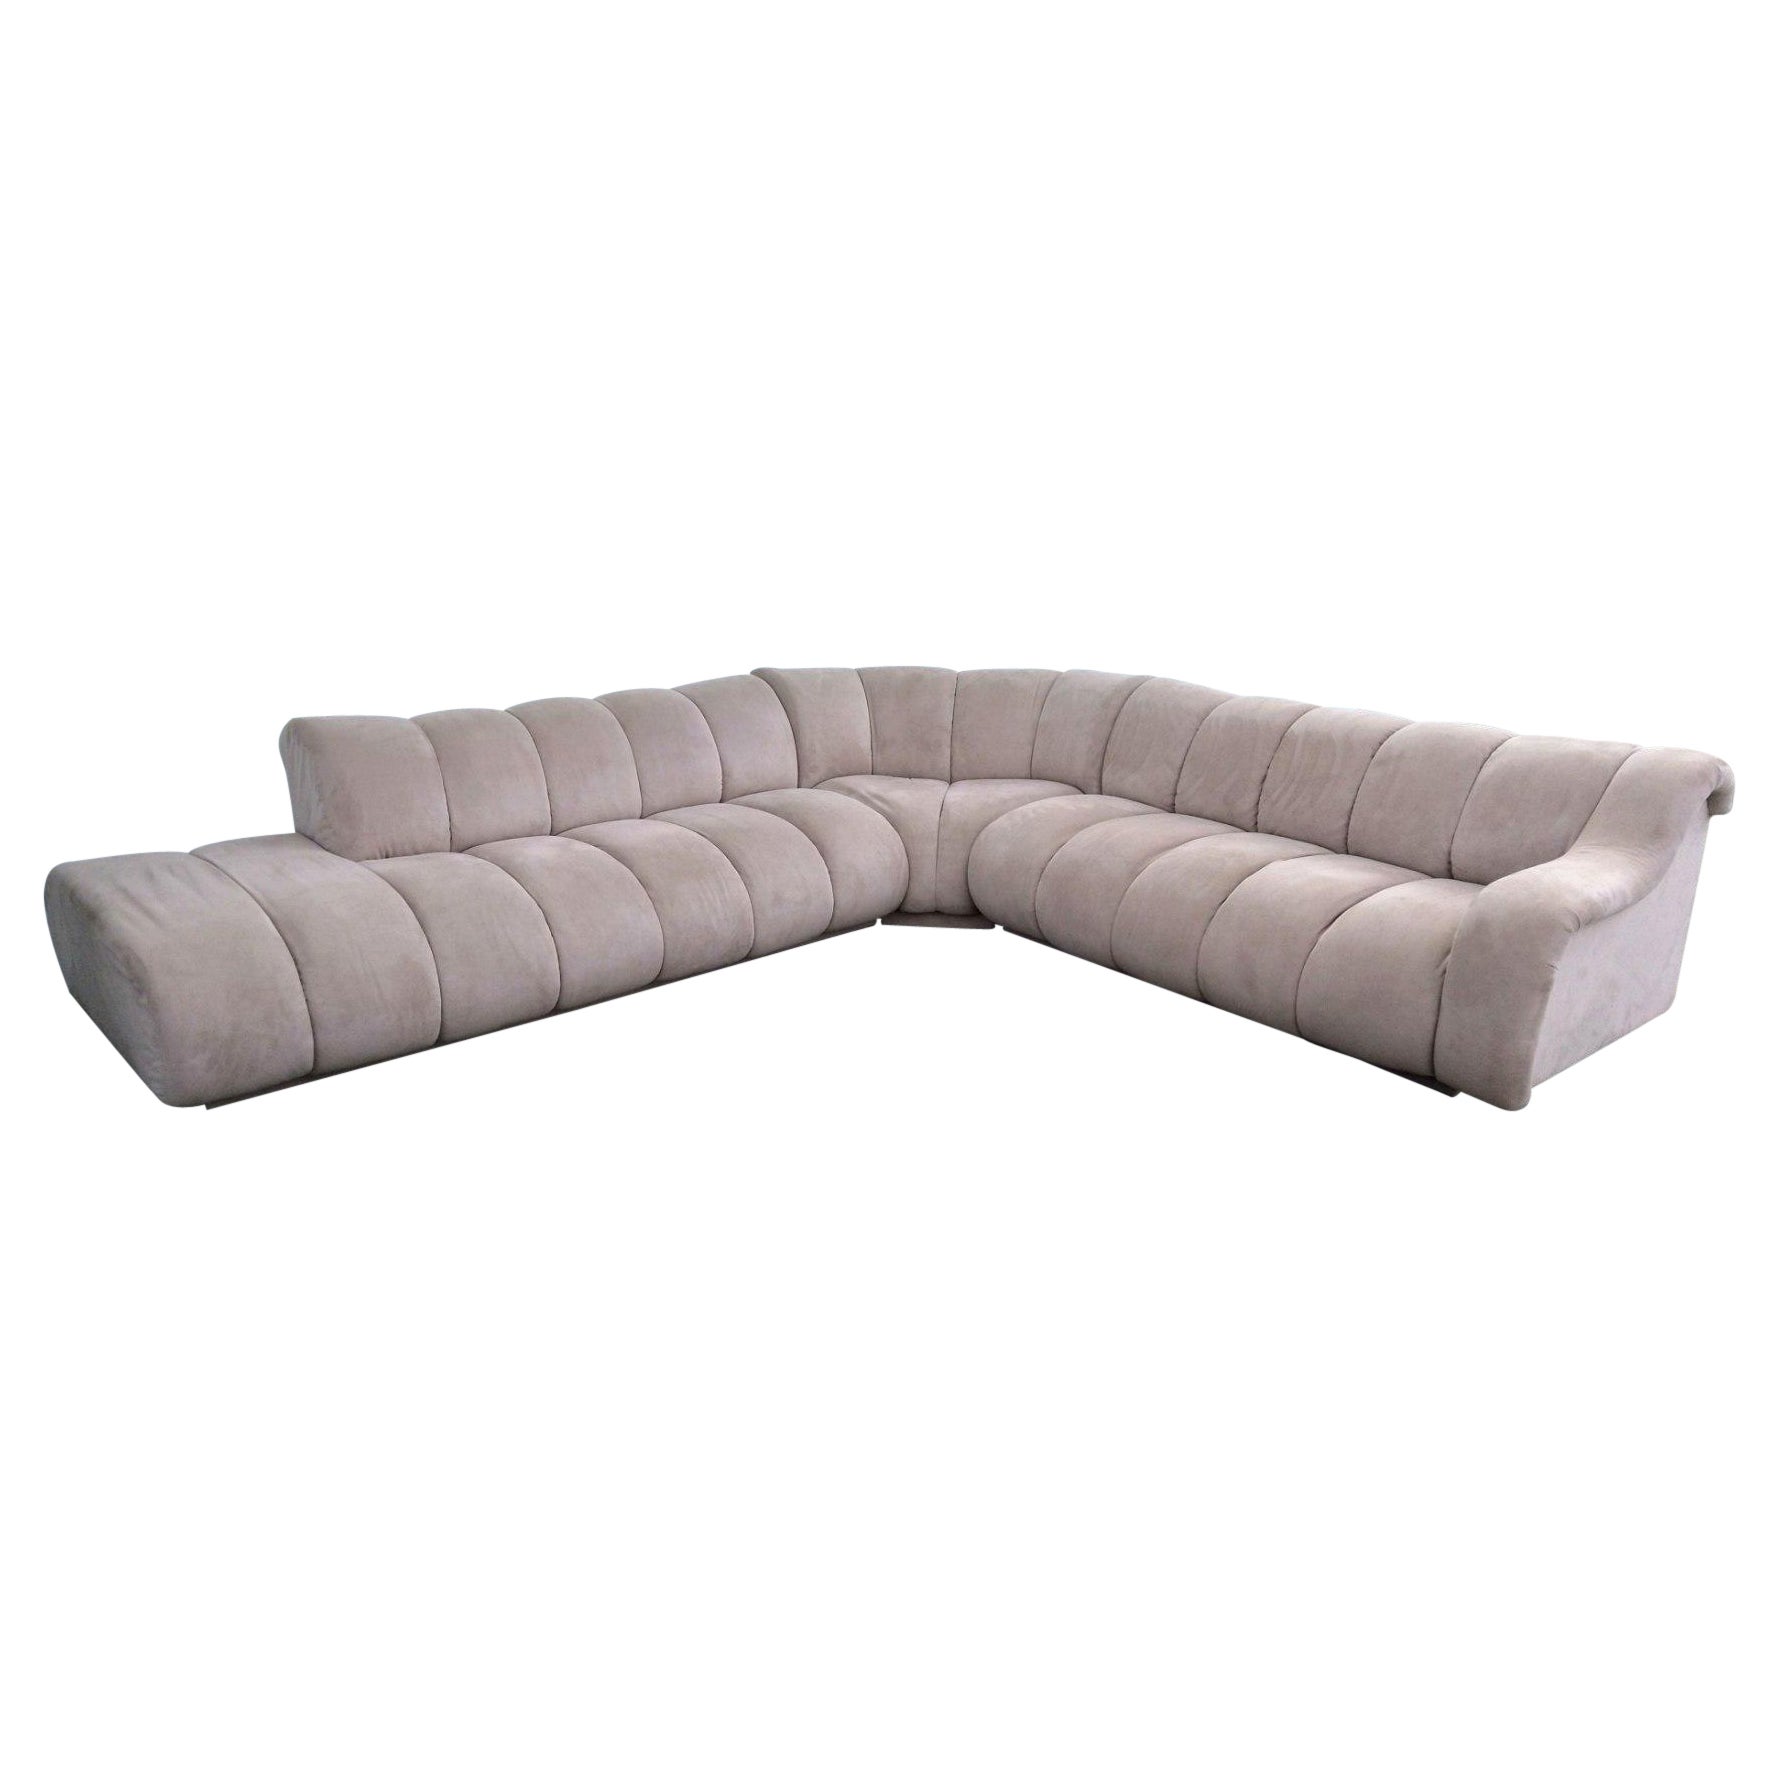 Steve Chase Style Channel Tufted Sectional by Directional For Sale